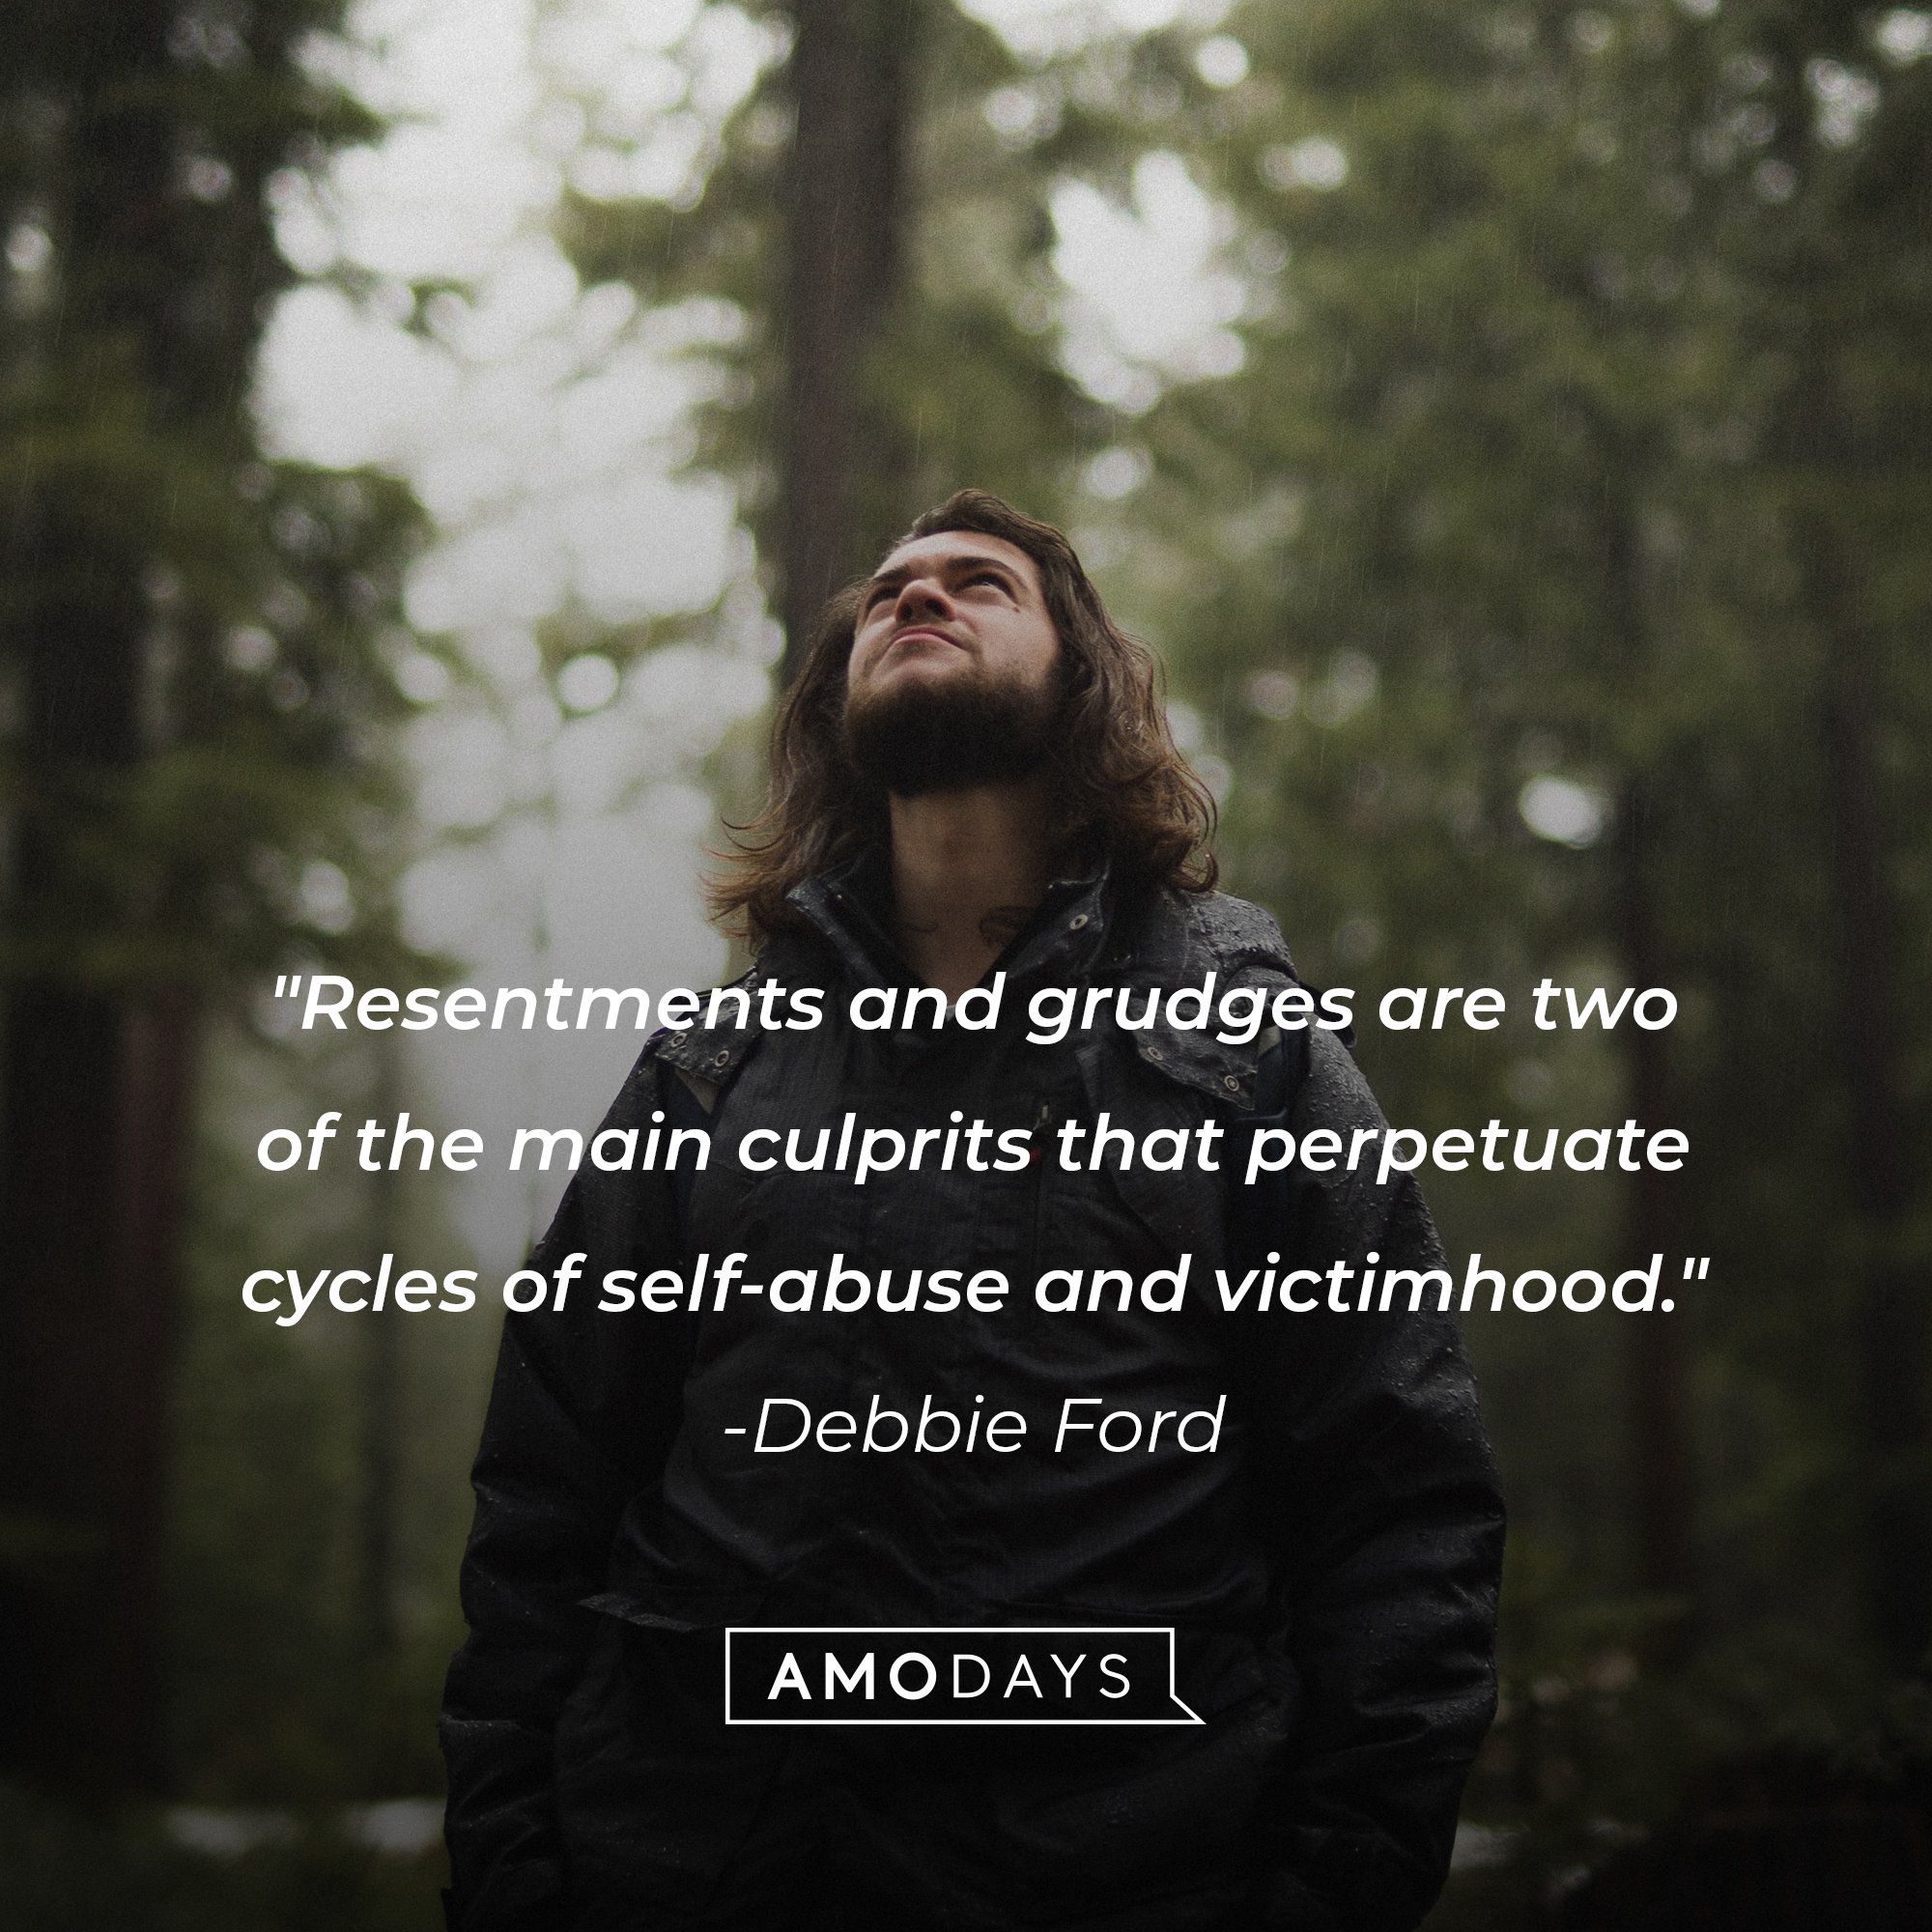  Debbie Ford's quote: "Resentments and grudges are two of the main culprits that perpetuate cycles of self-abuse and victimhood." | Image: AmoDays    